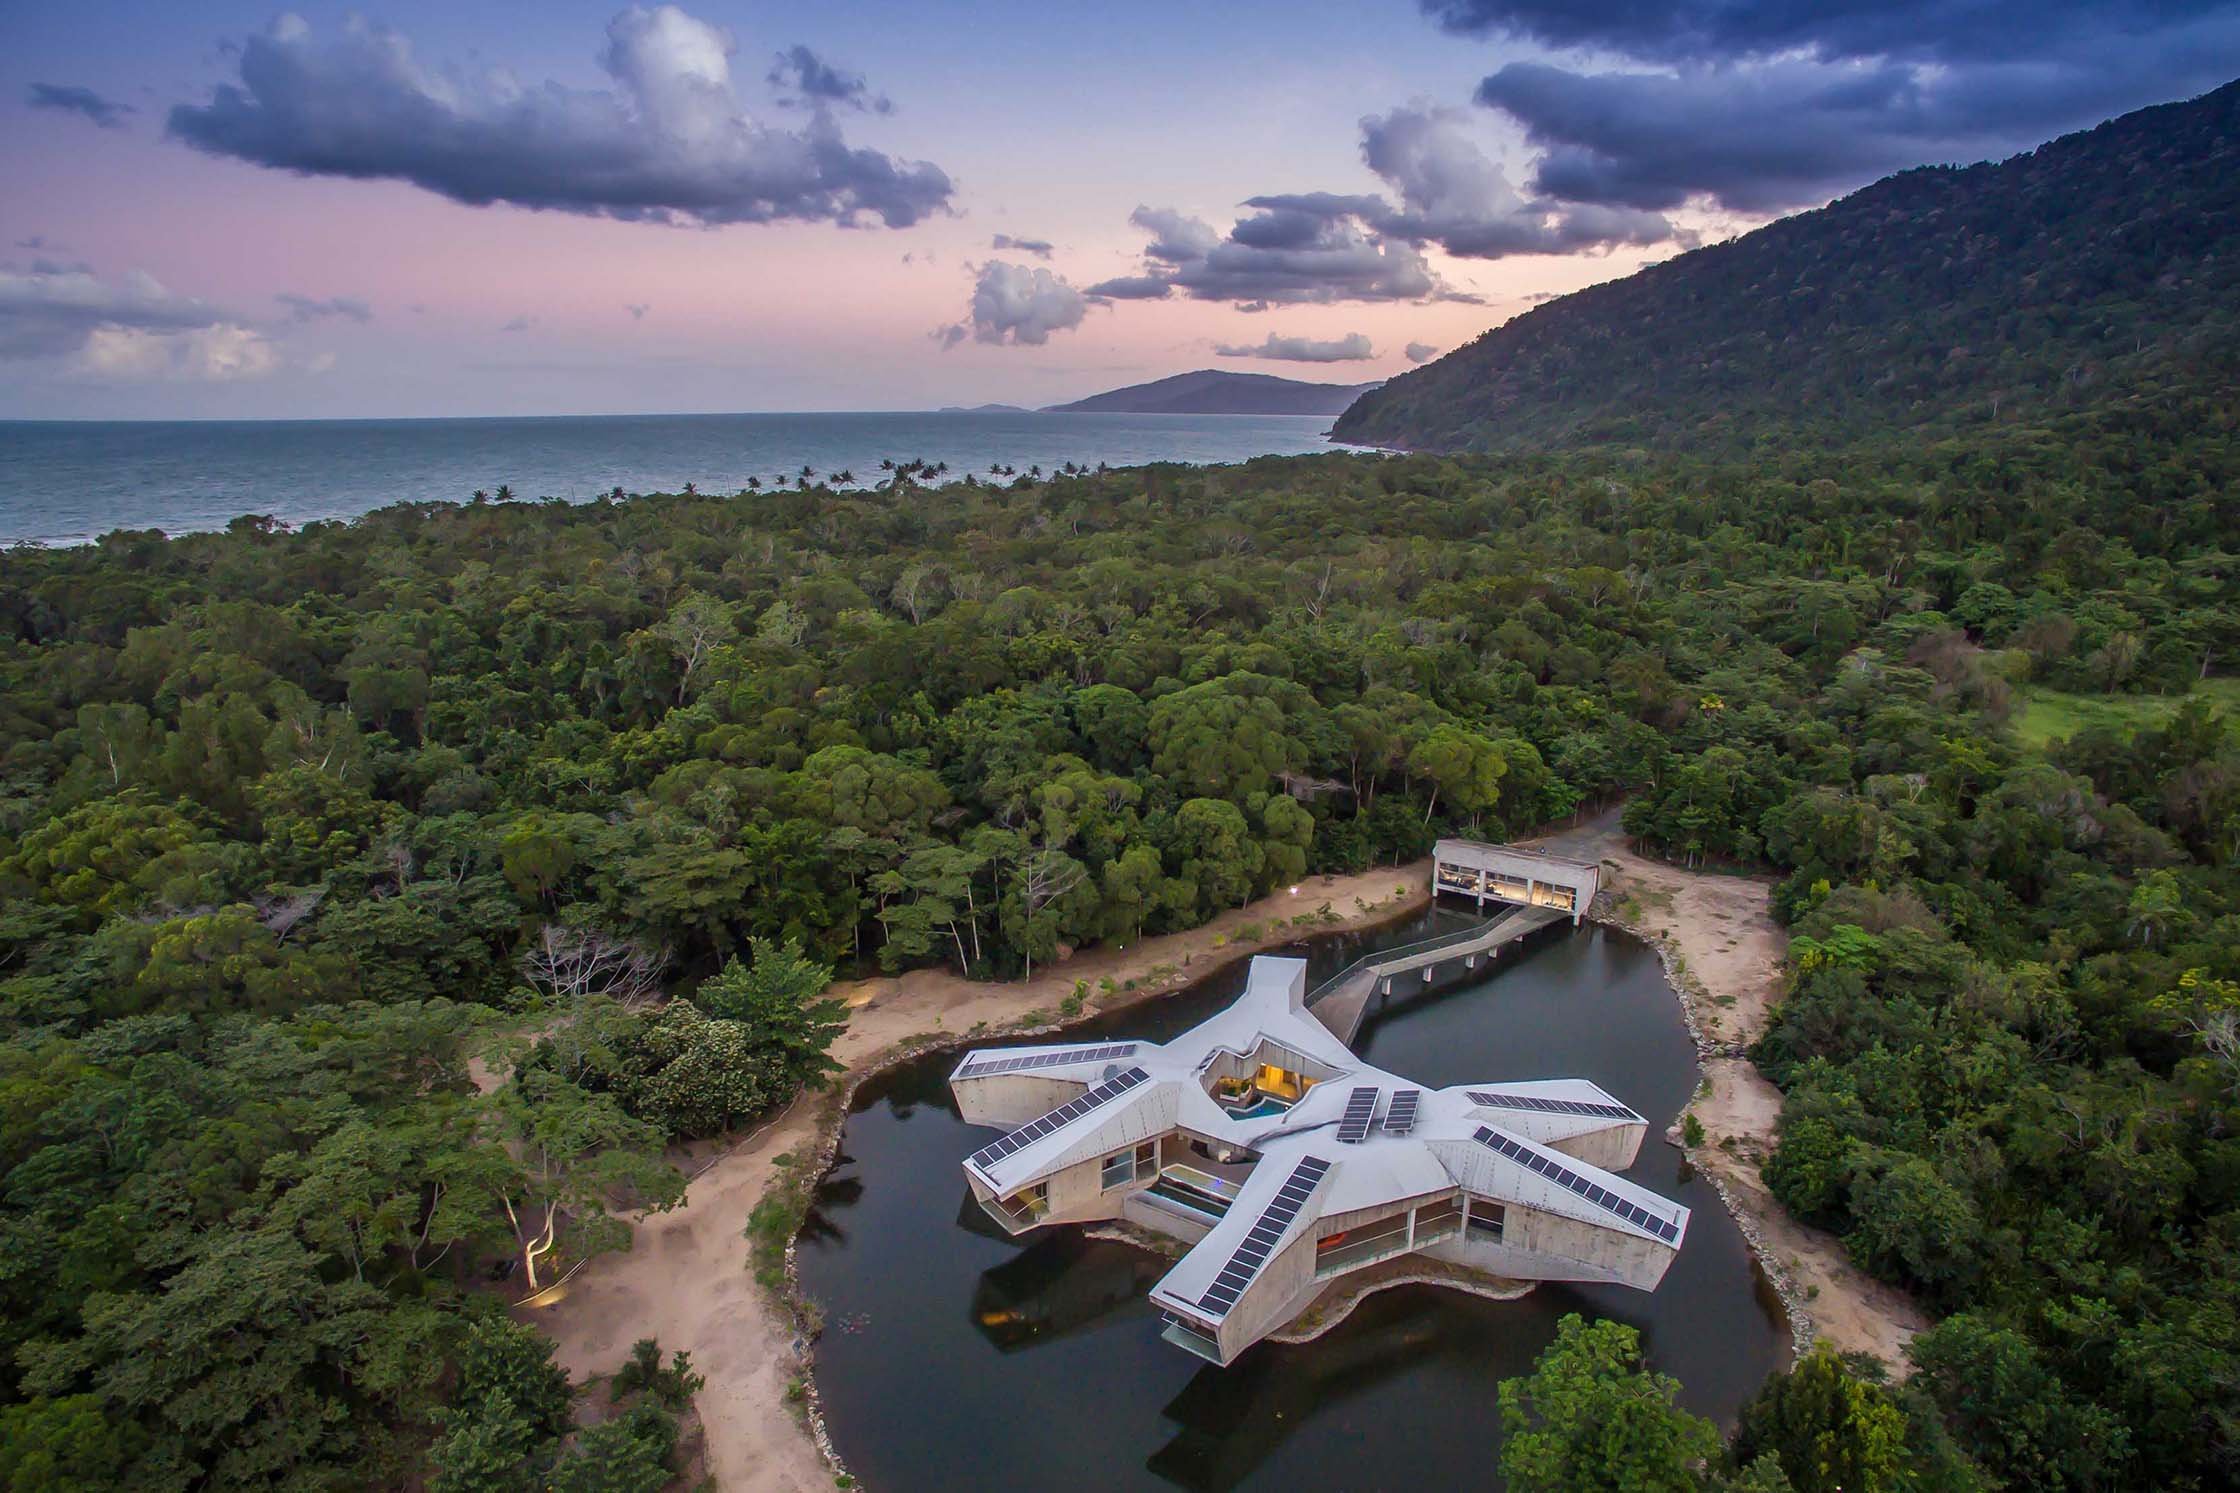 Alkira Resort House shown at sunset, with a view over Cape Tribulation